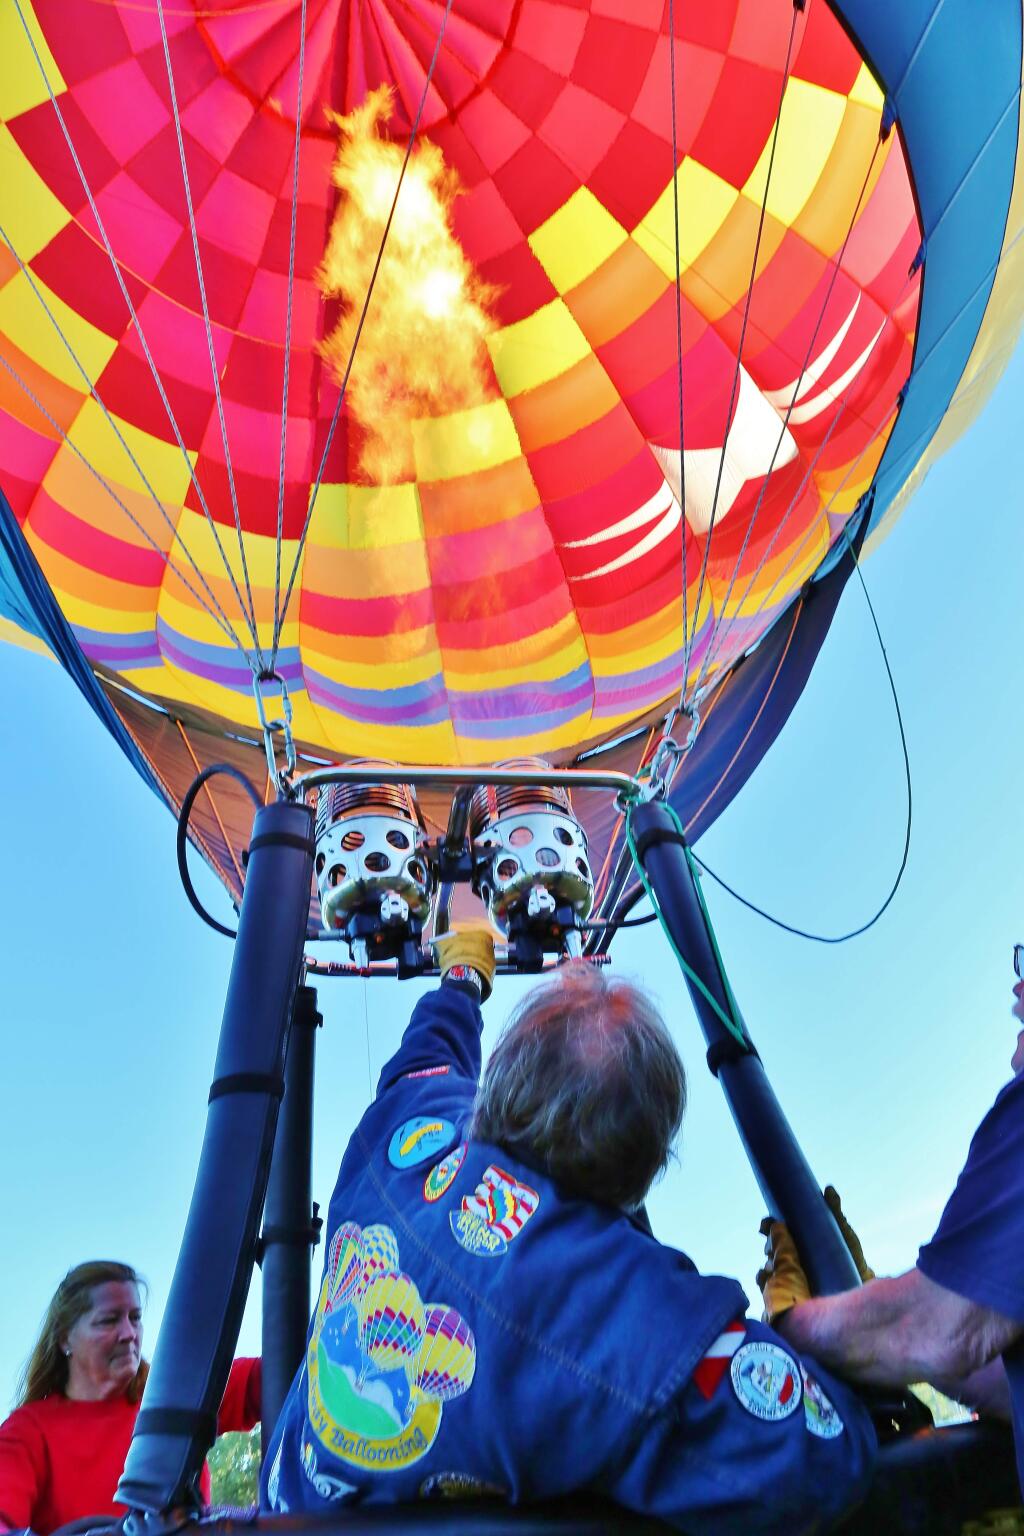 25th ANNUAL SONOMA COUNTY HOT AIR BALLOON CLASSIC. The 25th Annual Hot Air Balloon Classic is Saturday June 20th and Sunday June 21st at Keiser Park in Windsor. Early risers will get to see the spectacular 'Dawn Patrol' at 5am on both days. Photos Will Bucquoy.